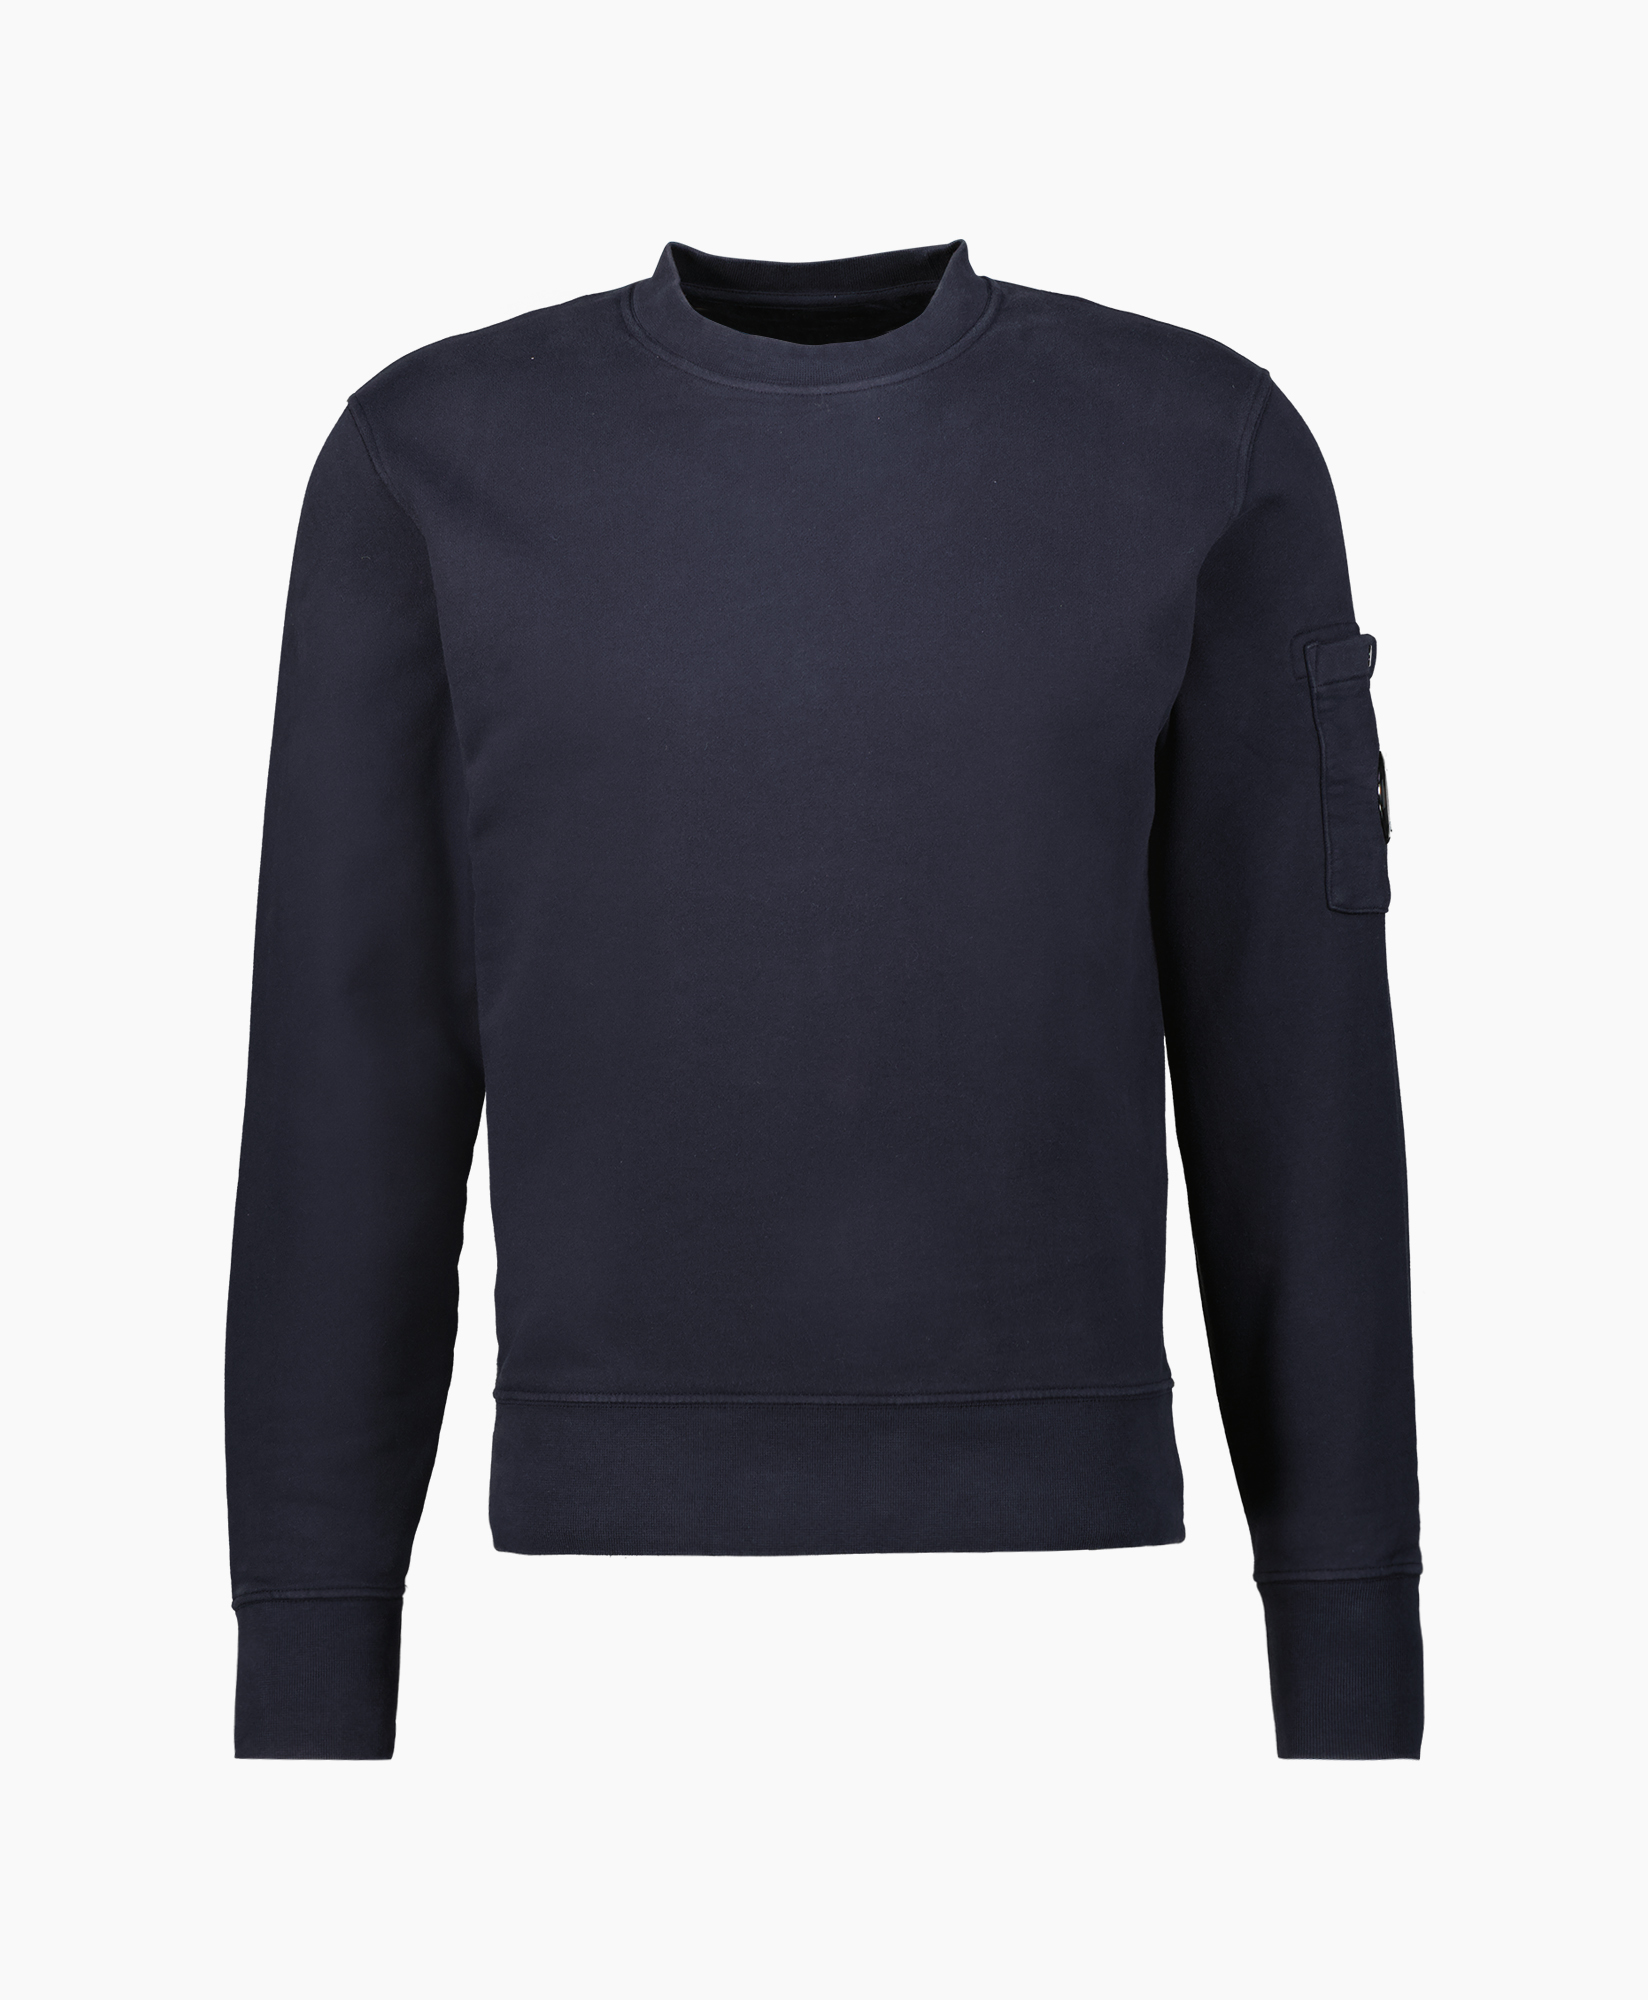 Cp Company Sweater Brushed & Emerized Diagonal Fle Donker Blauw